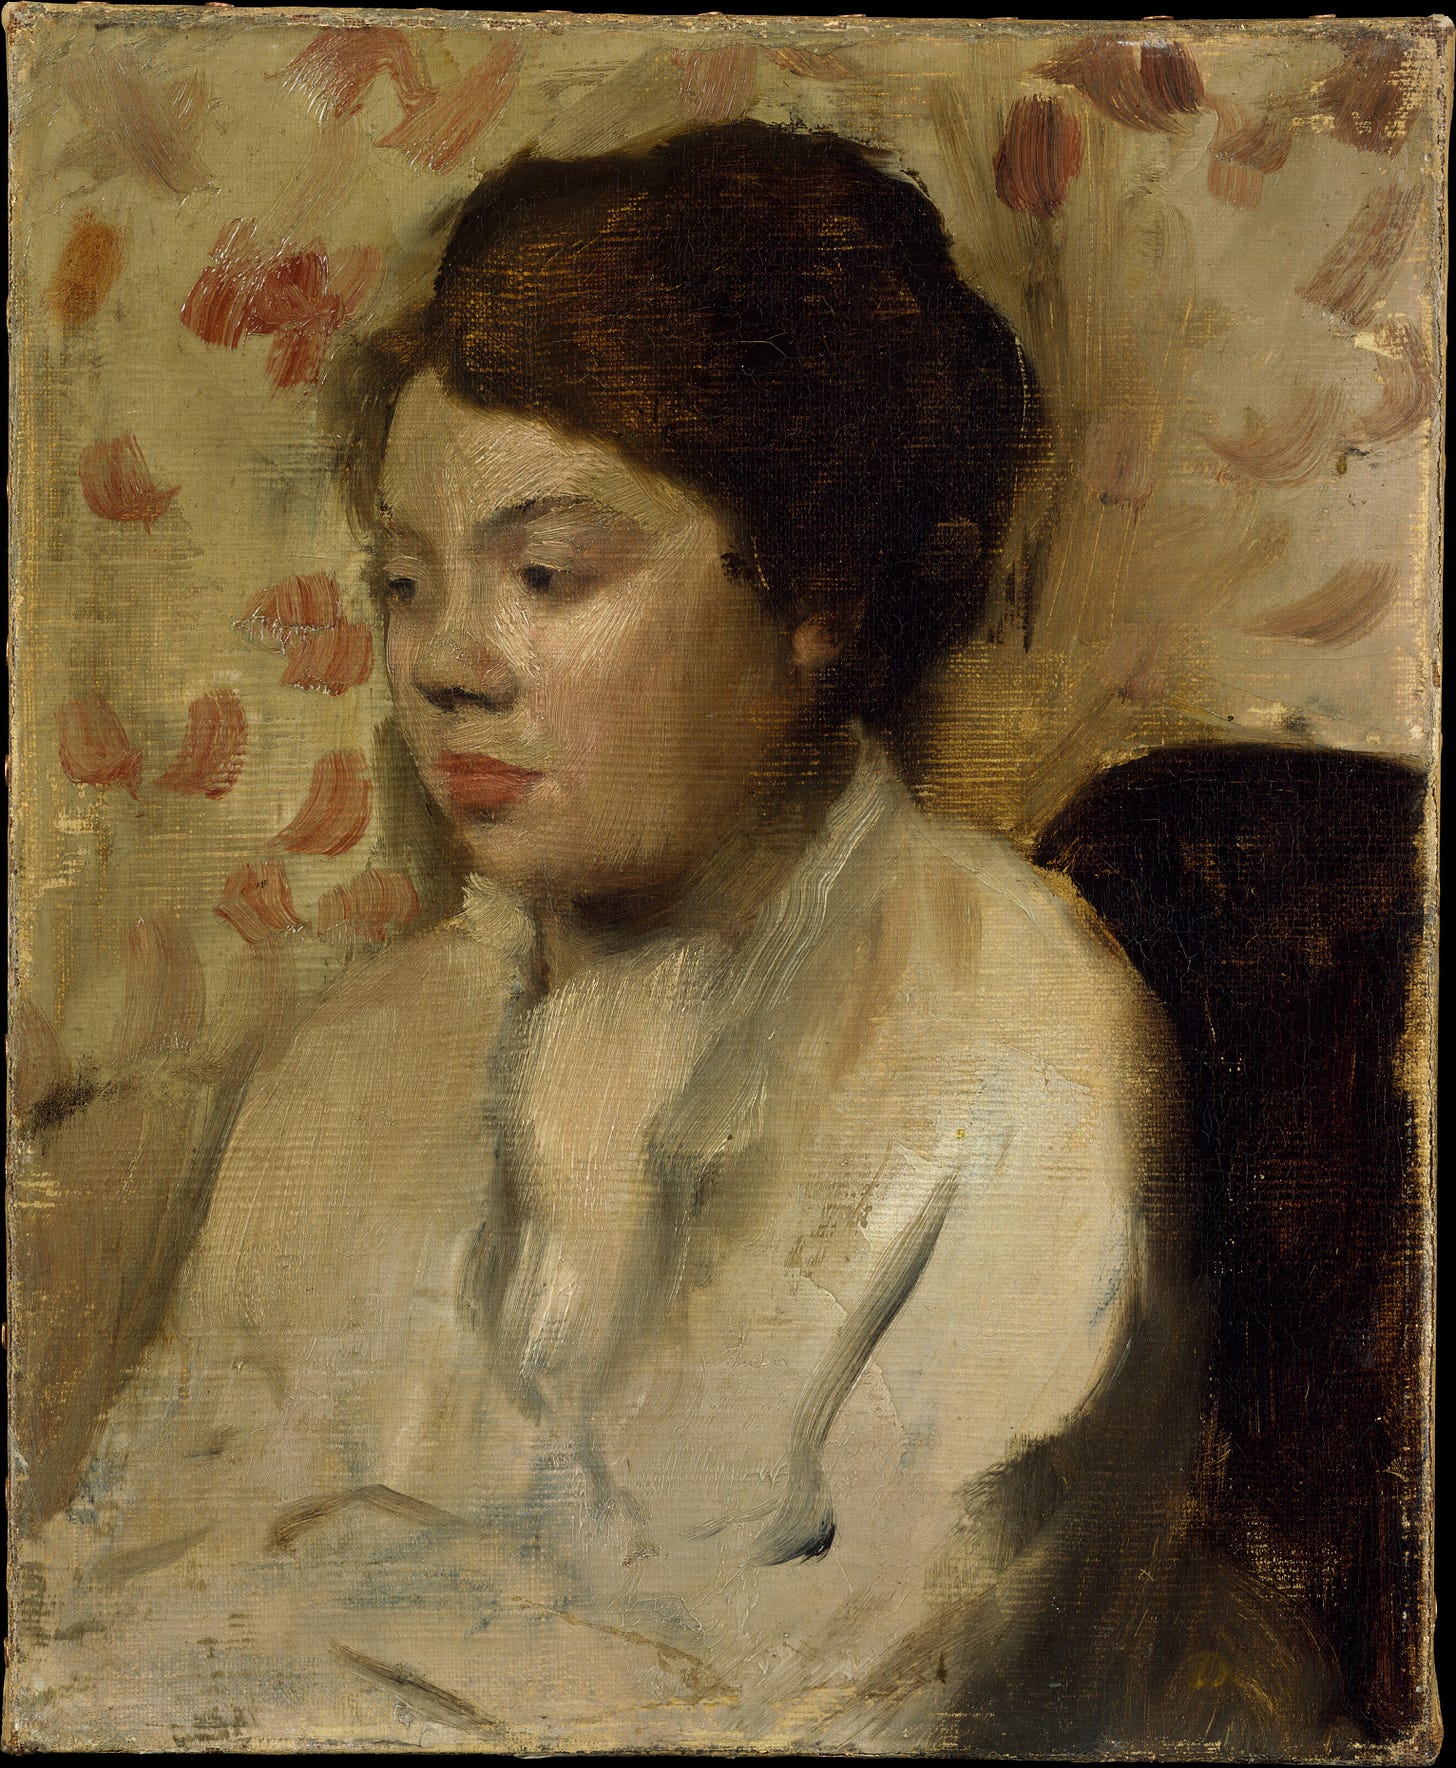 A portrait of a young woman with dark hair sitting. 